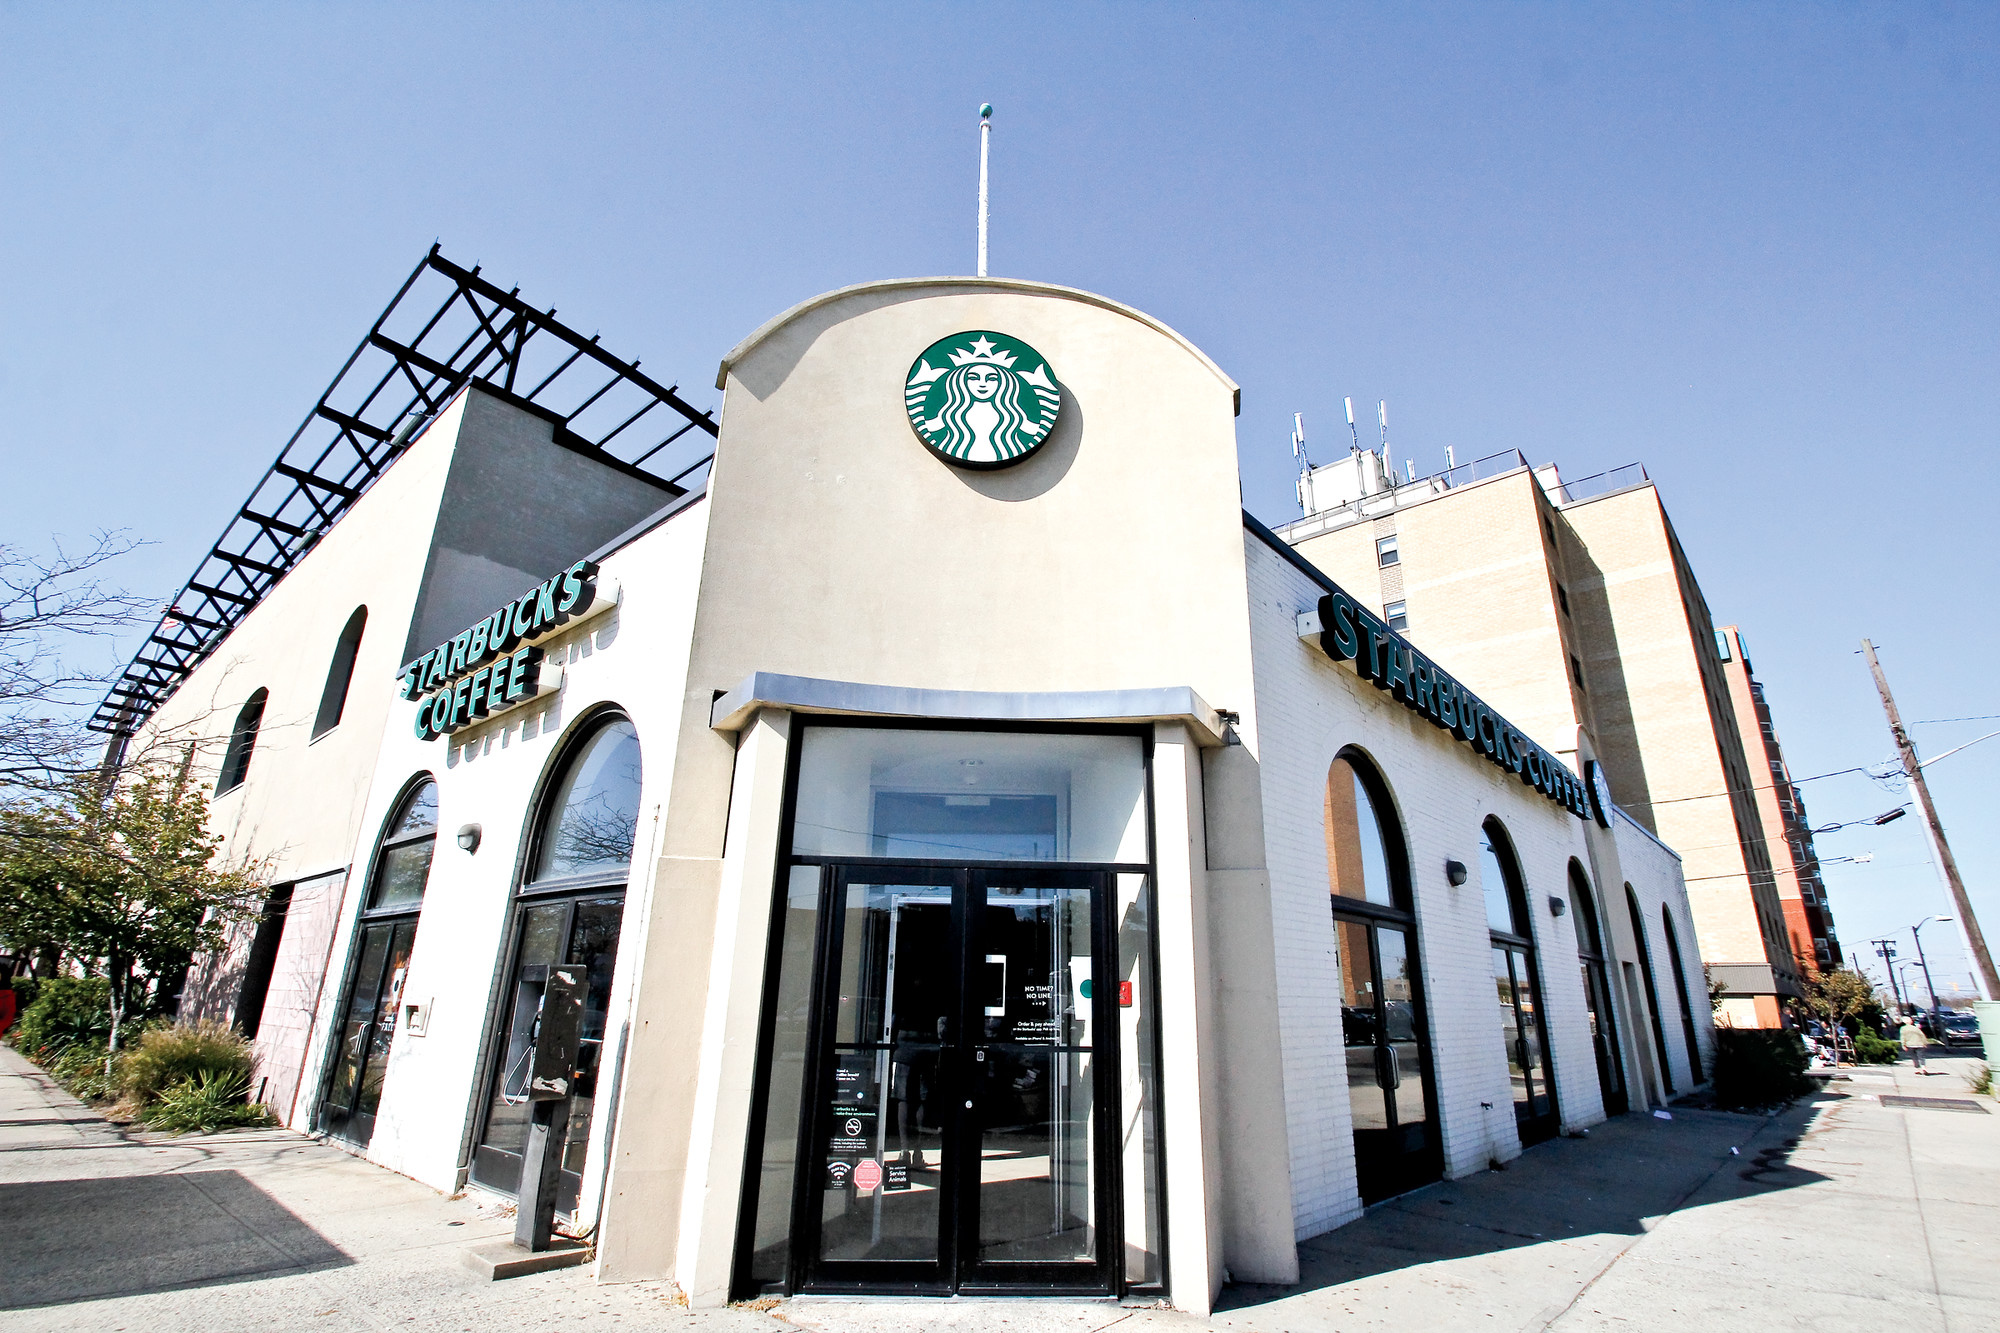 Christina Daly/Herald
The Starbucks on West Park Avenue is looking to serve wine and beer as well as small dinner dishes in the evenings. It filed for a wine and beer license earlier this month.